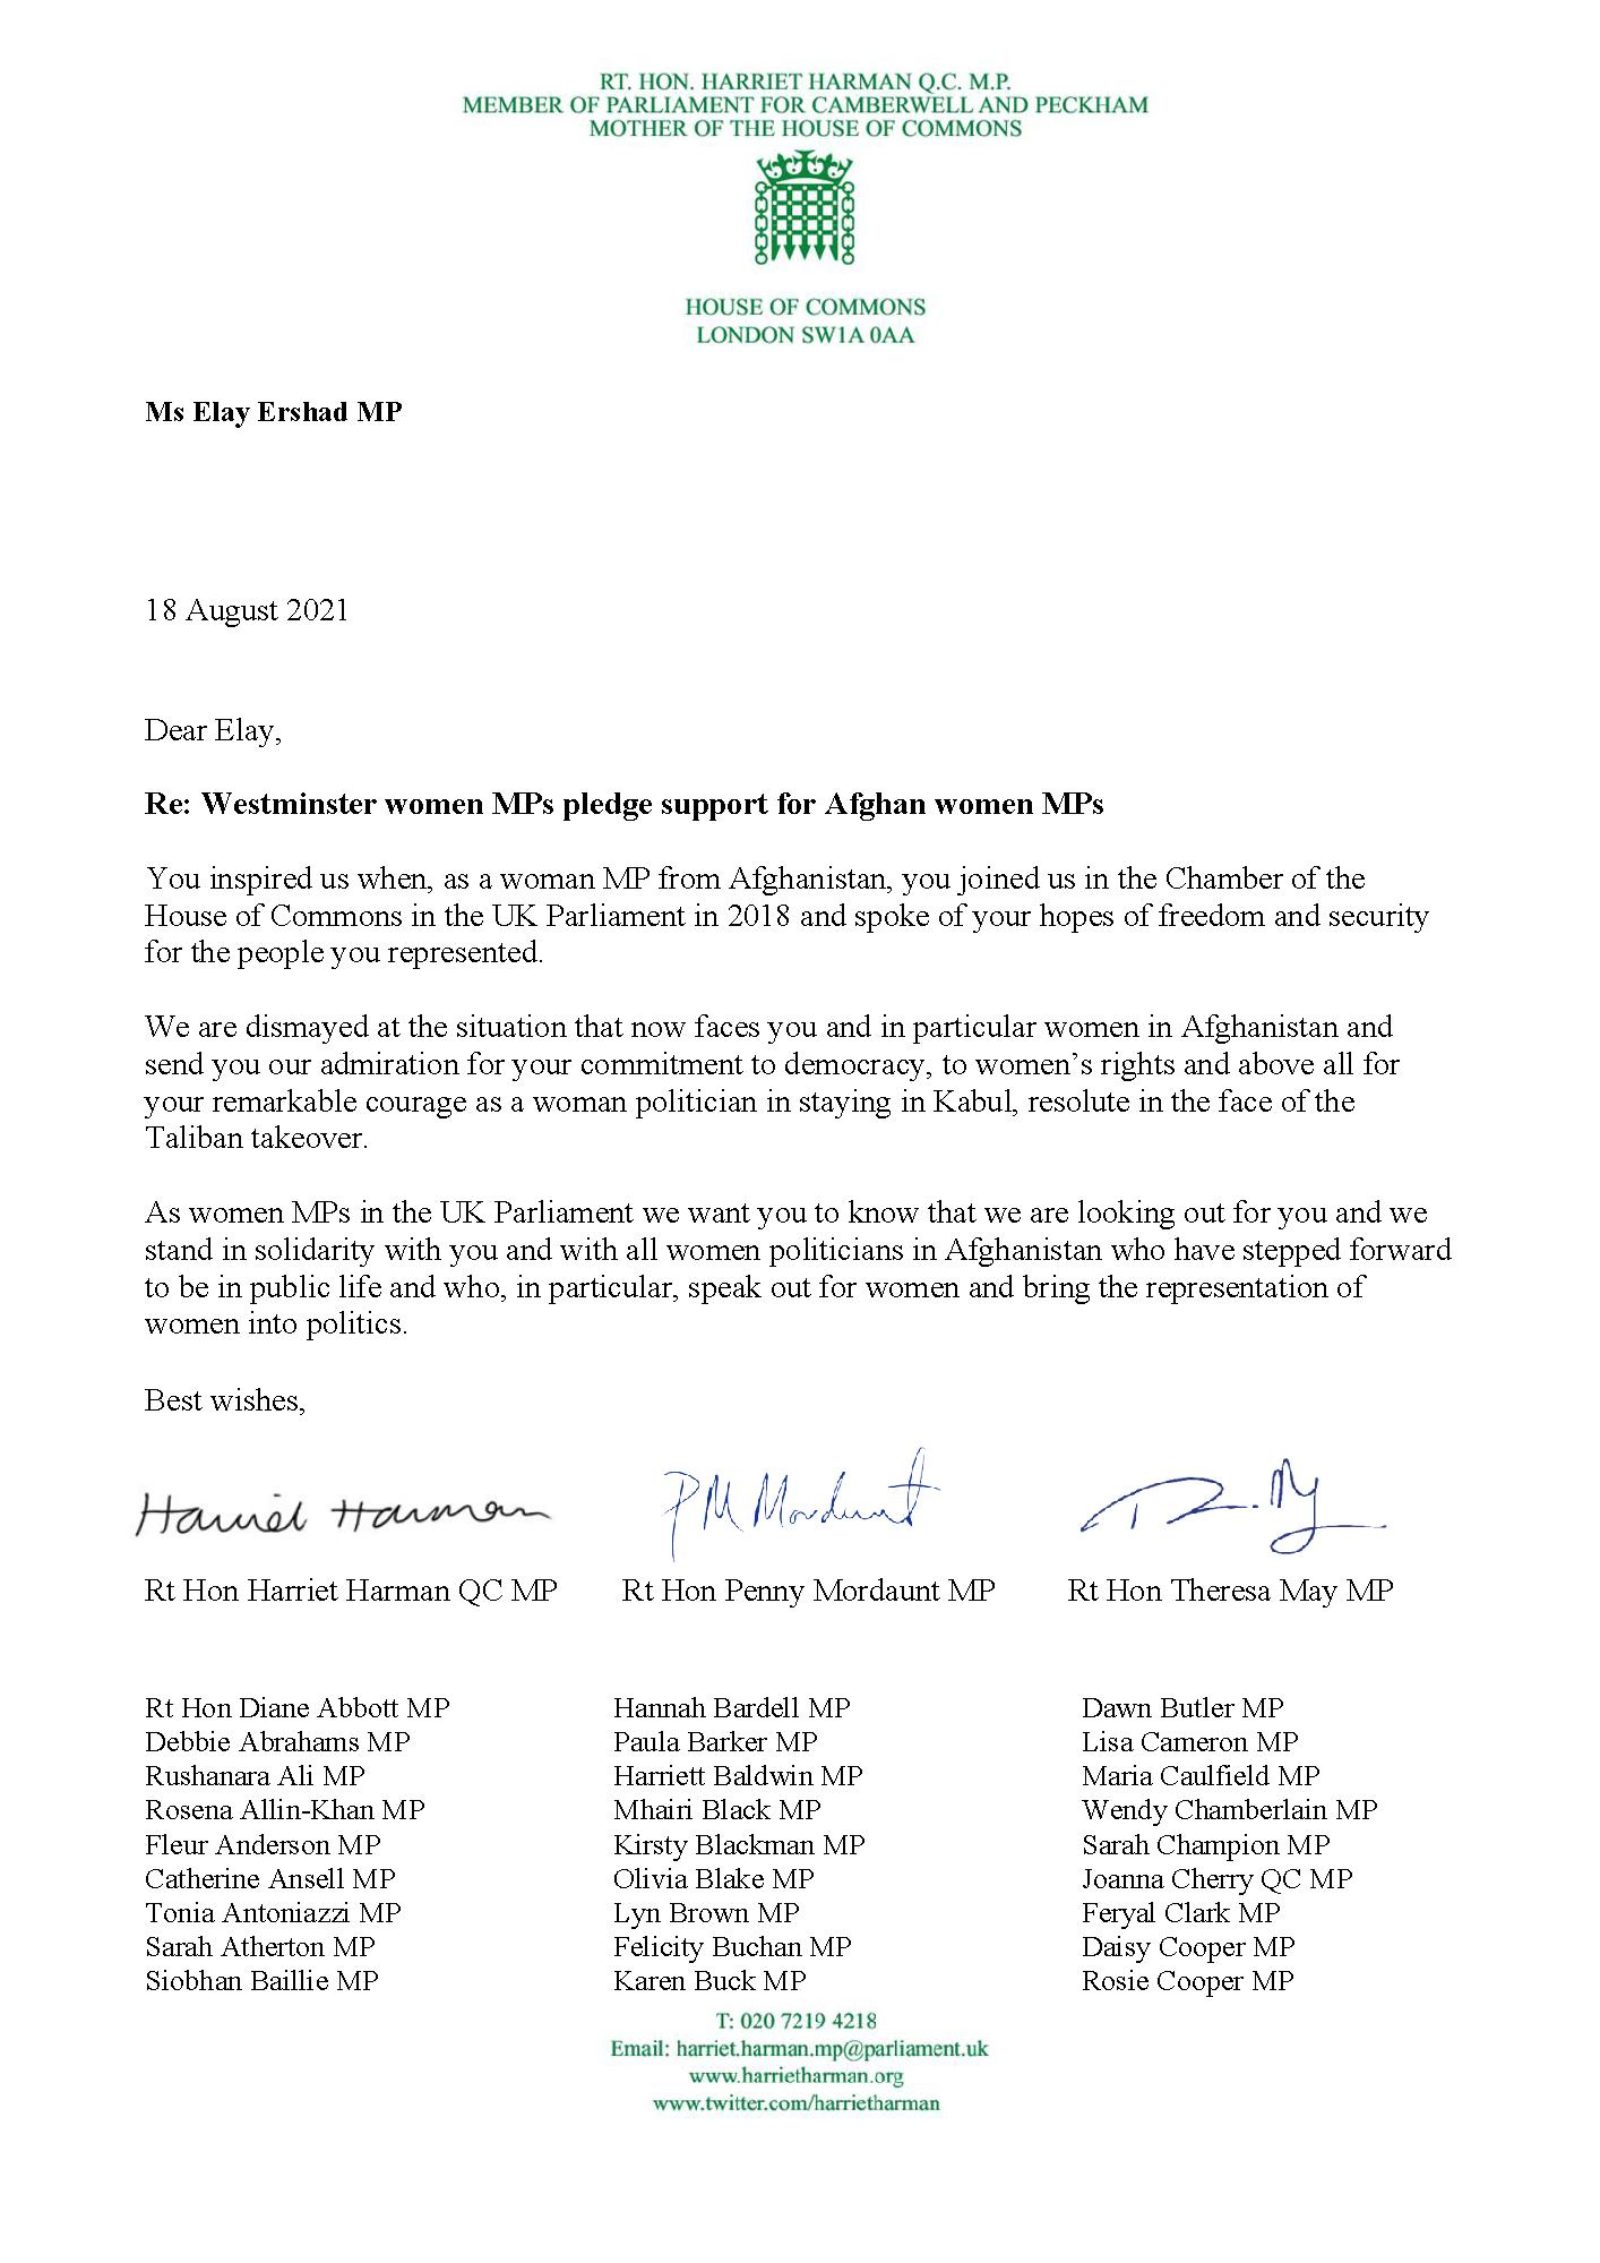 Westminster women MPs pledge support for Afghan women MPs - Page 1